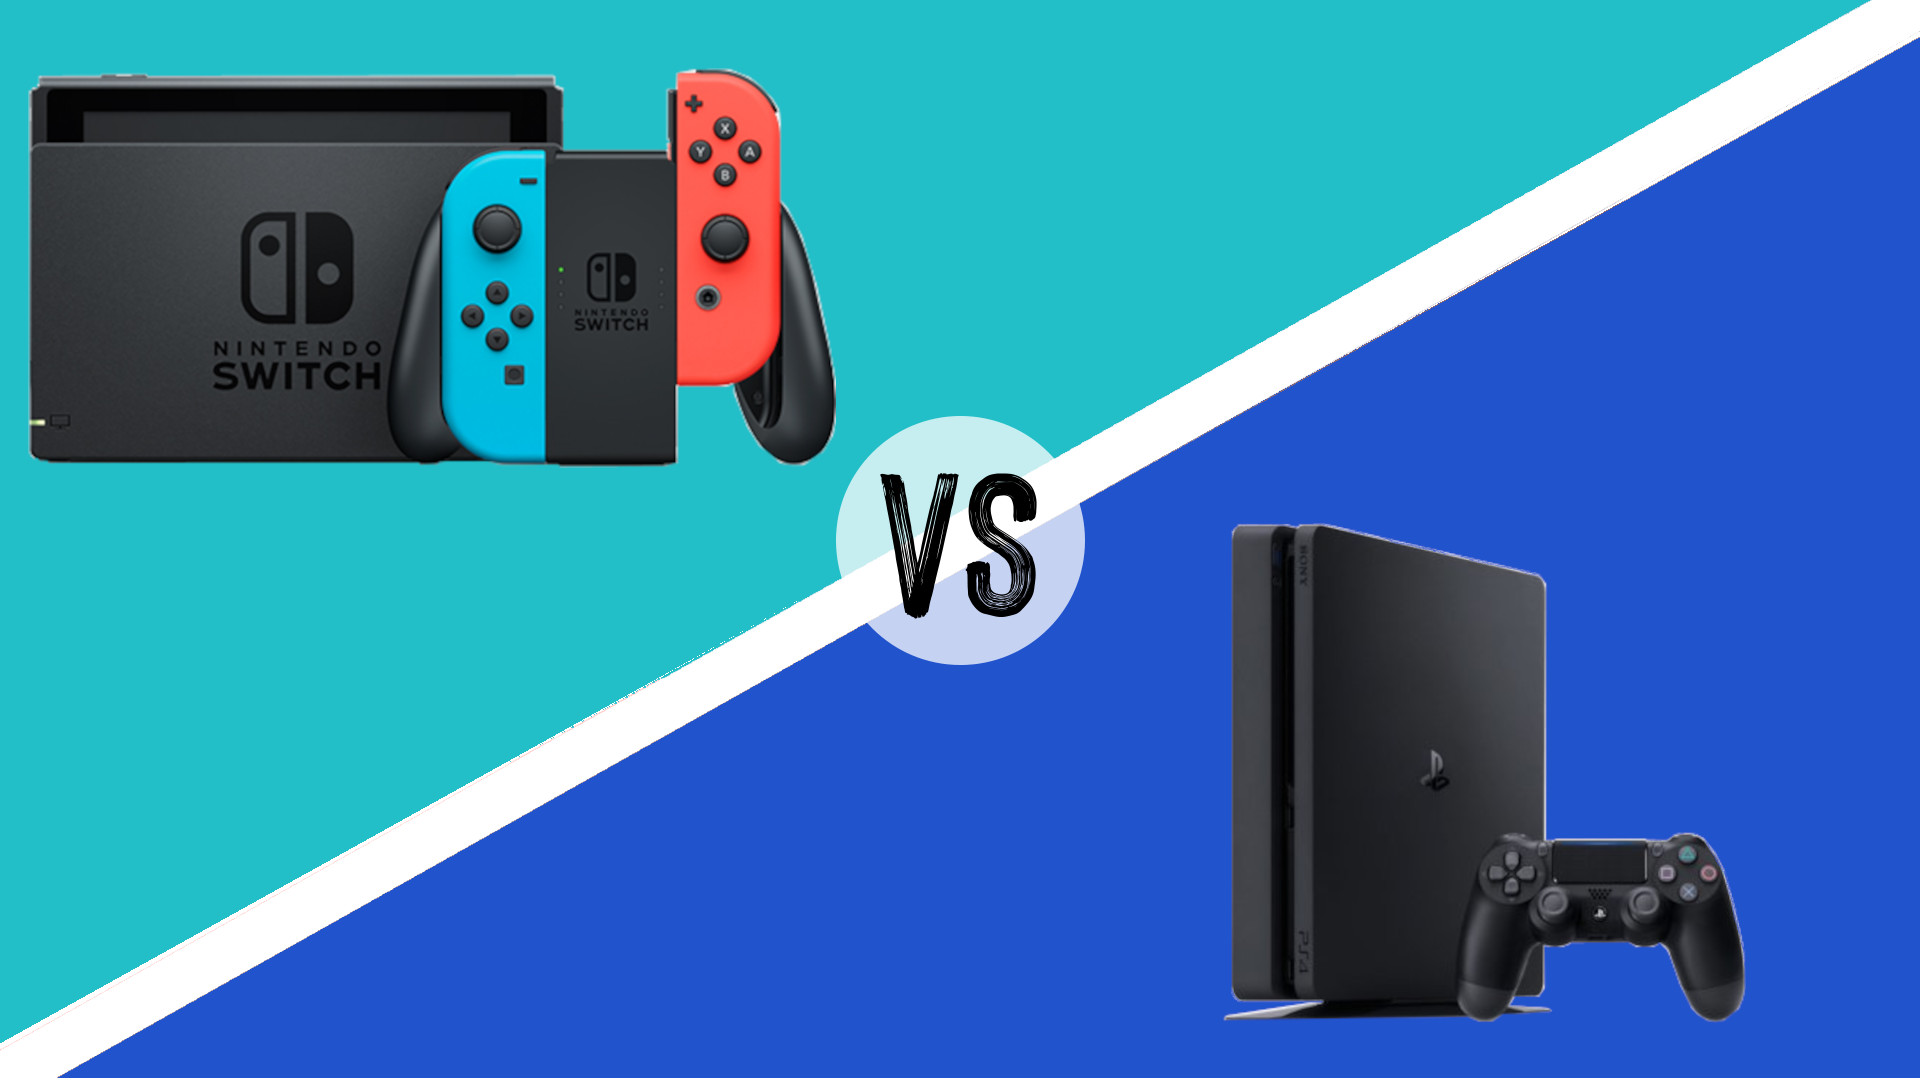 desillusion Tyggegummi campingvogn Nintendo Switch vs PS4: Which should you buy? | Creative Bloq